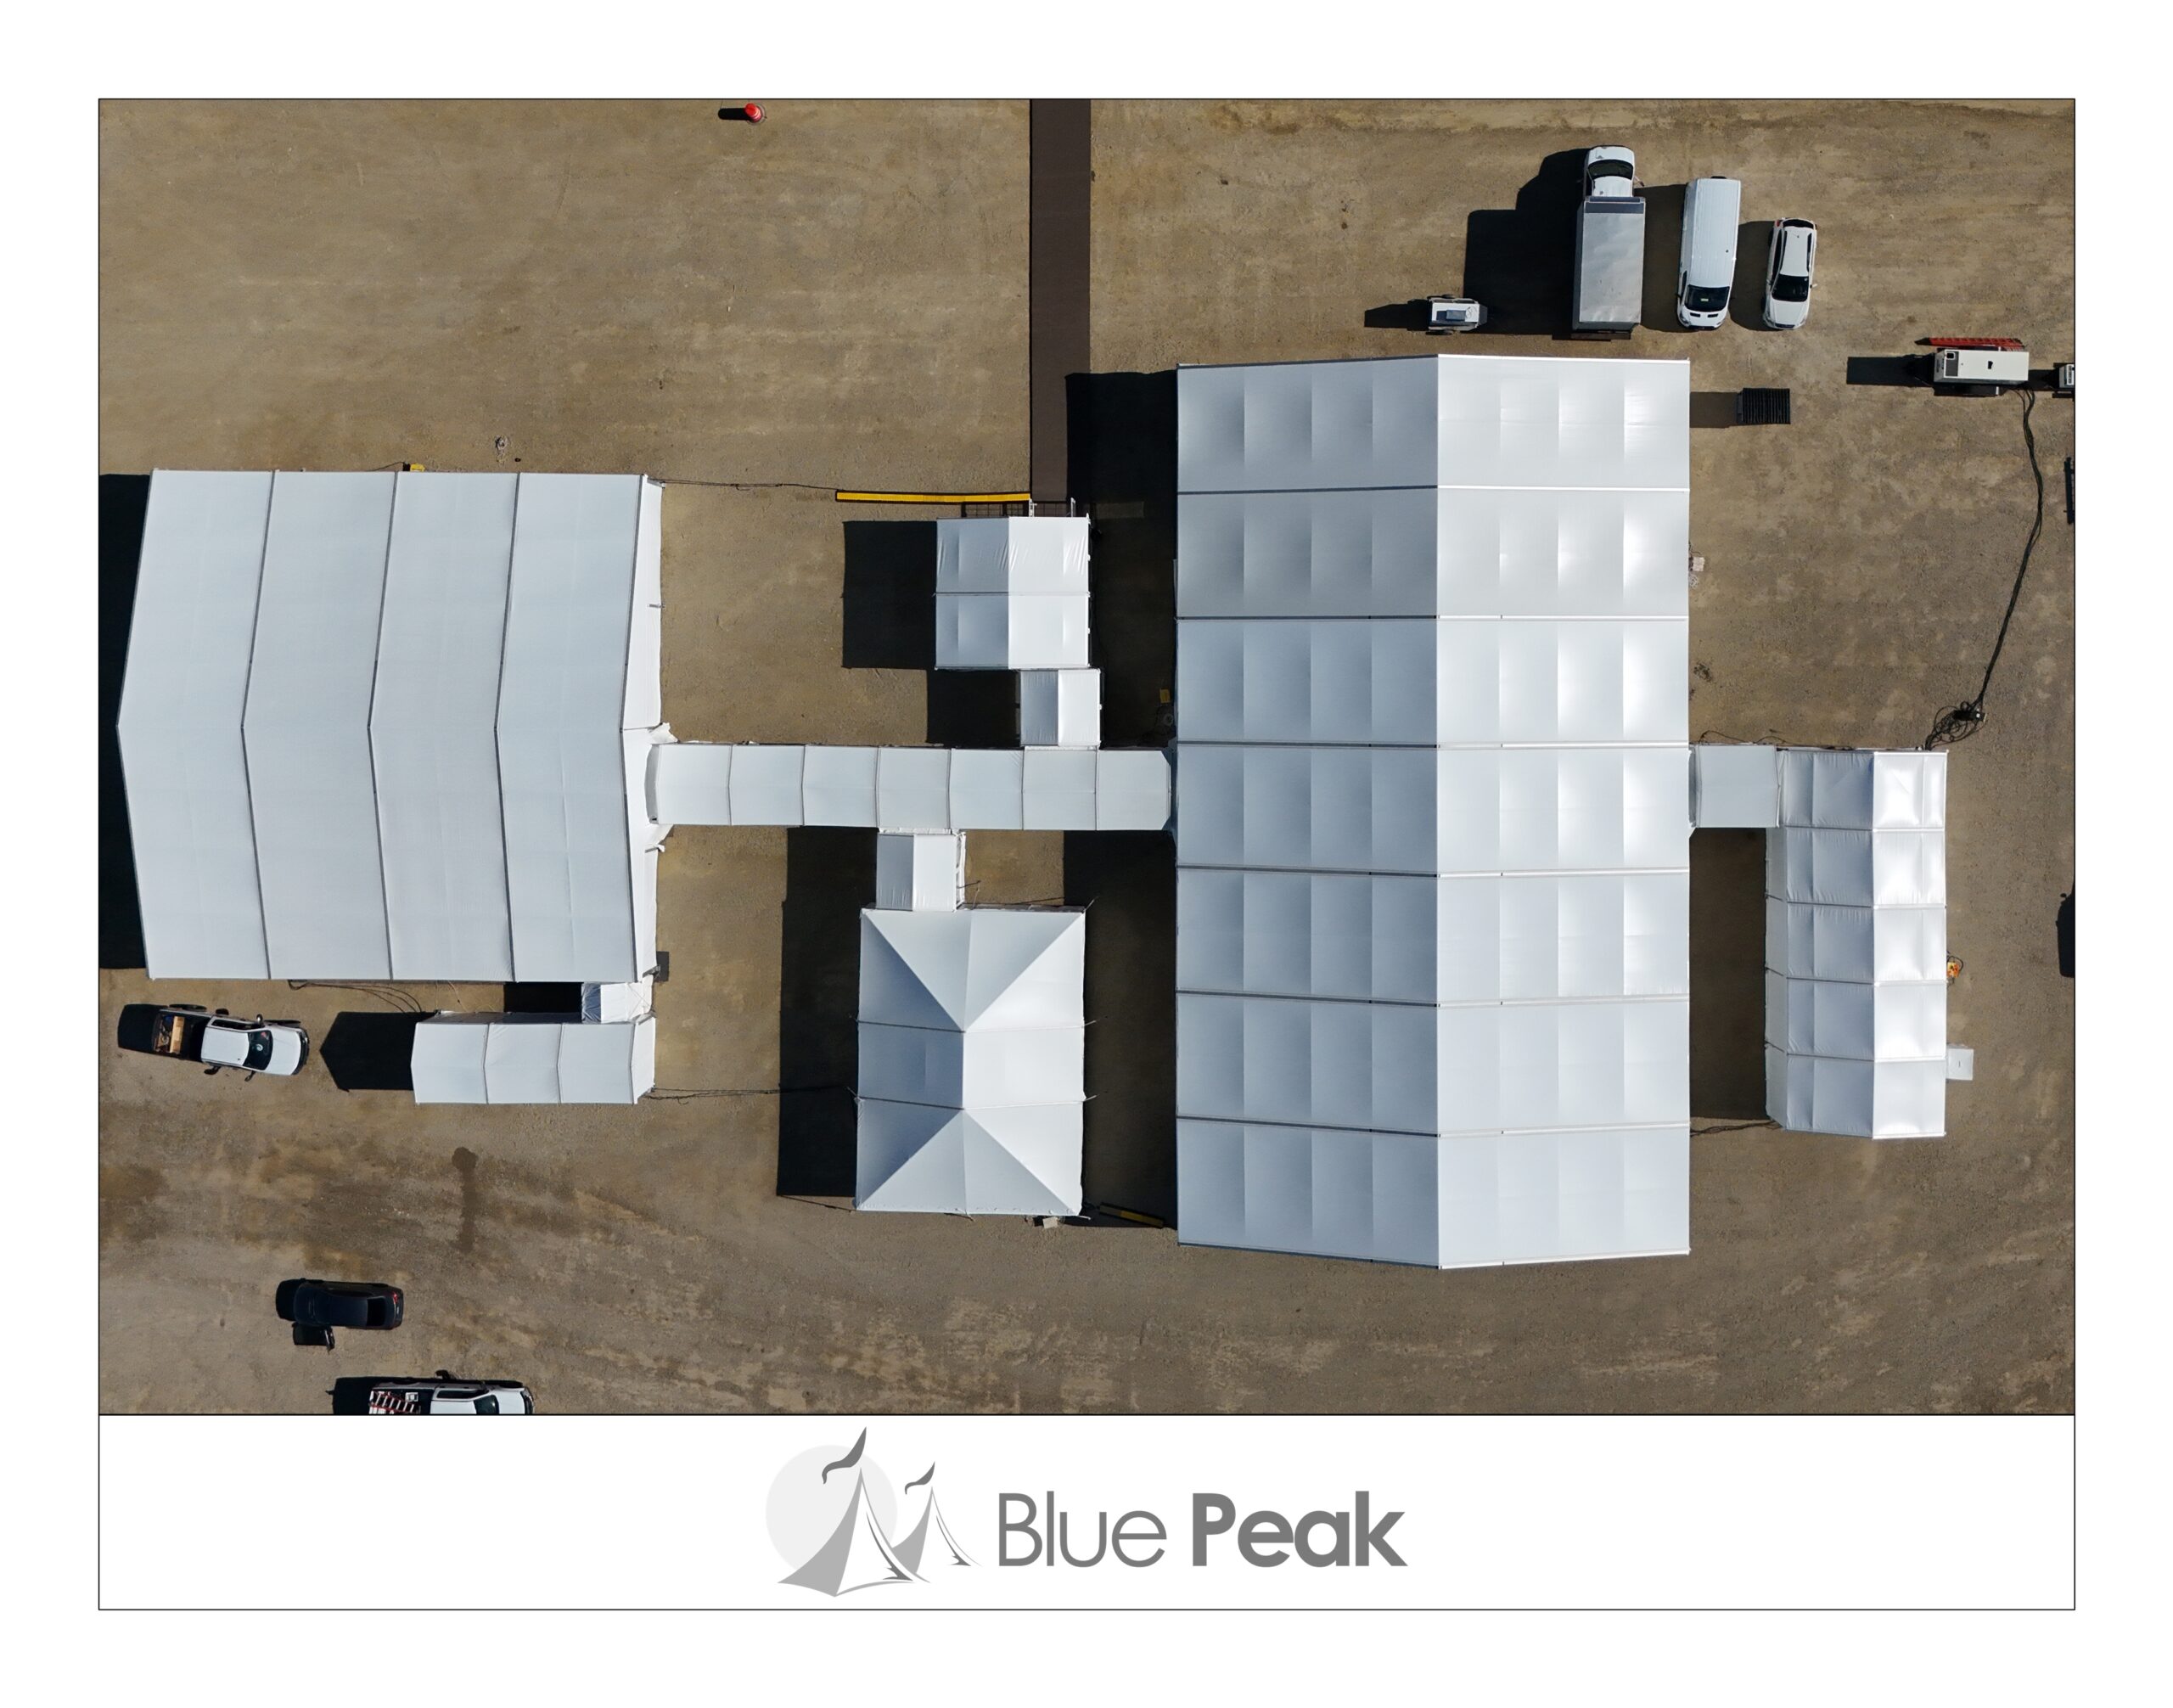 Industrial project for a commercial. This a drone image of the project site compiled of big and large structure tents for construction ground breaking ceremony.